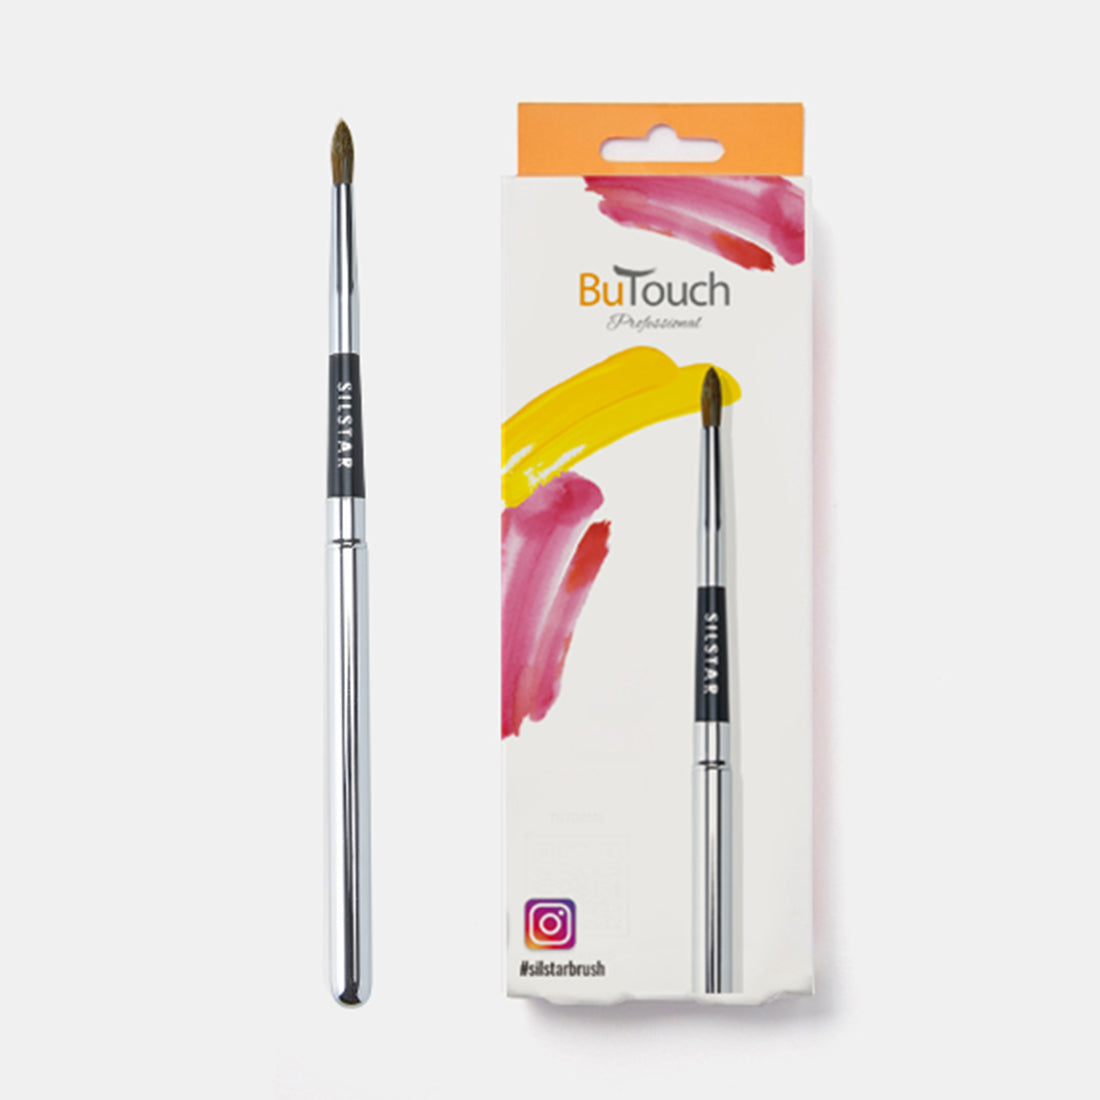 [GGD] SILSTAR BUTOUCH PROFESSIONAL DIGITAL PAINTING BRUSH